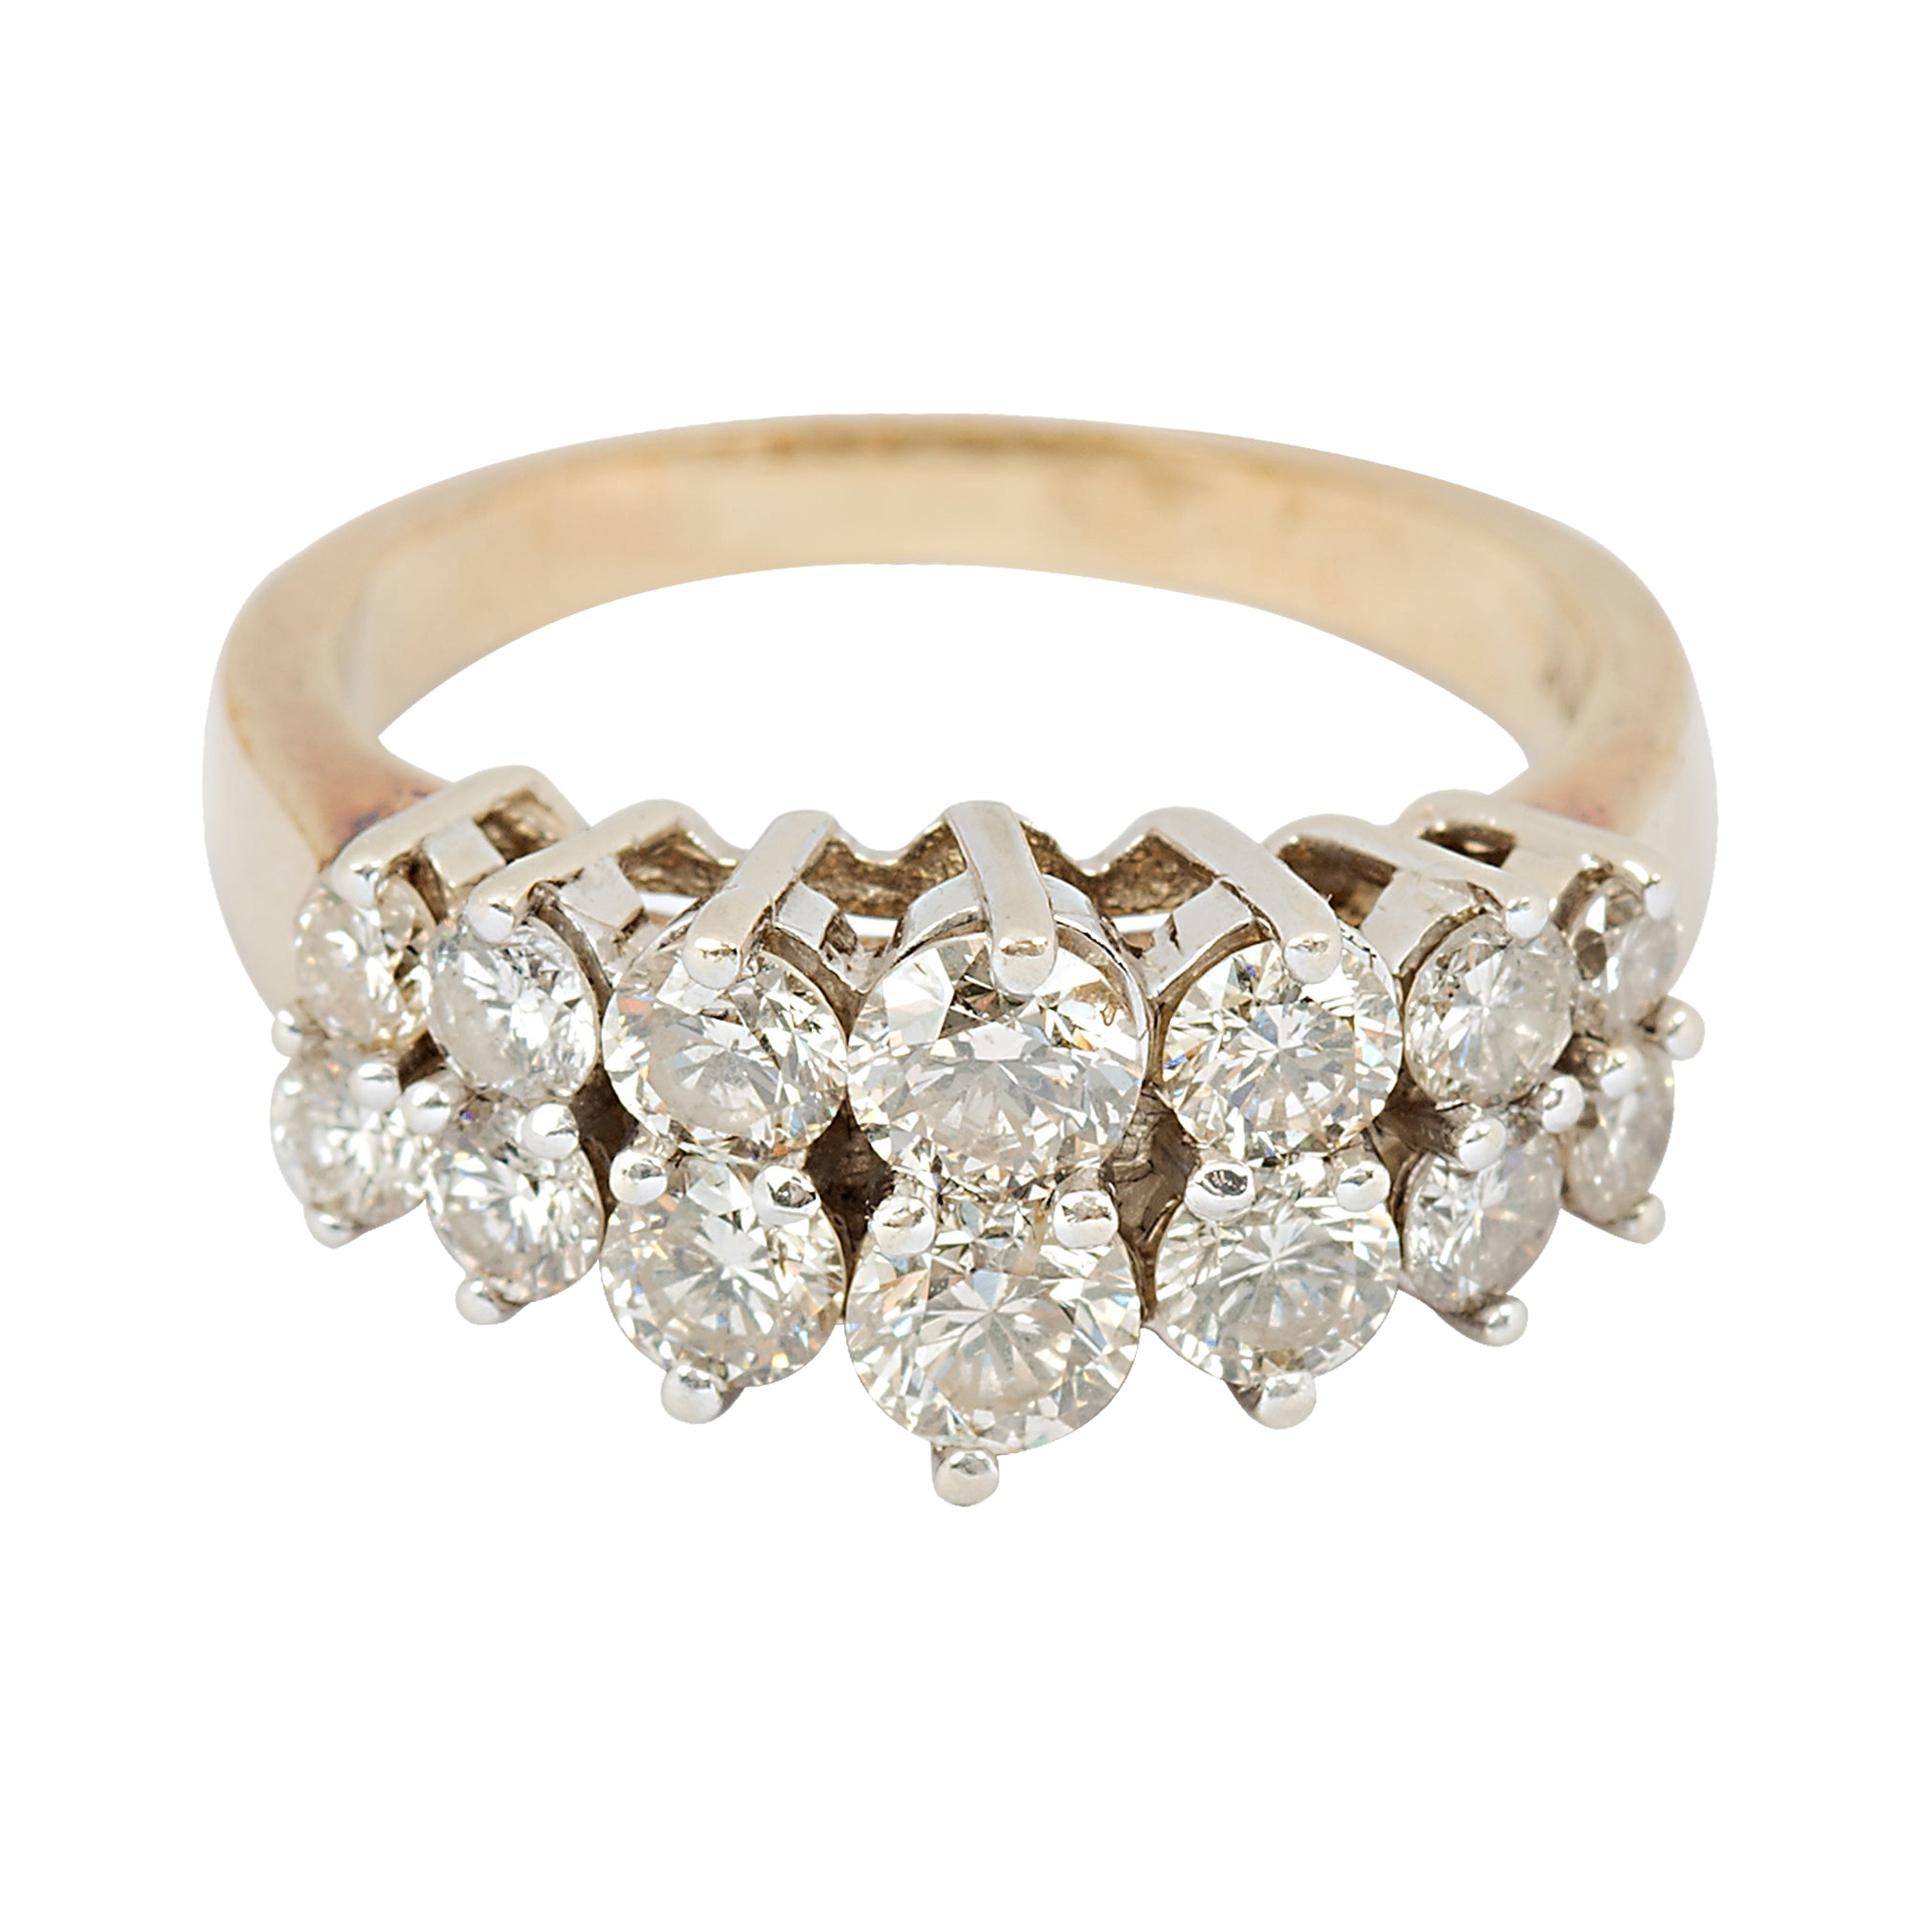 Tiffany Knot Double Row Ring in Yellow Gold with Diamonds